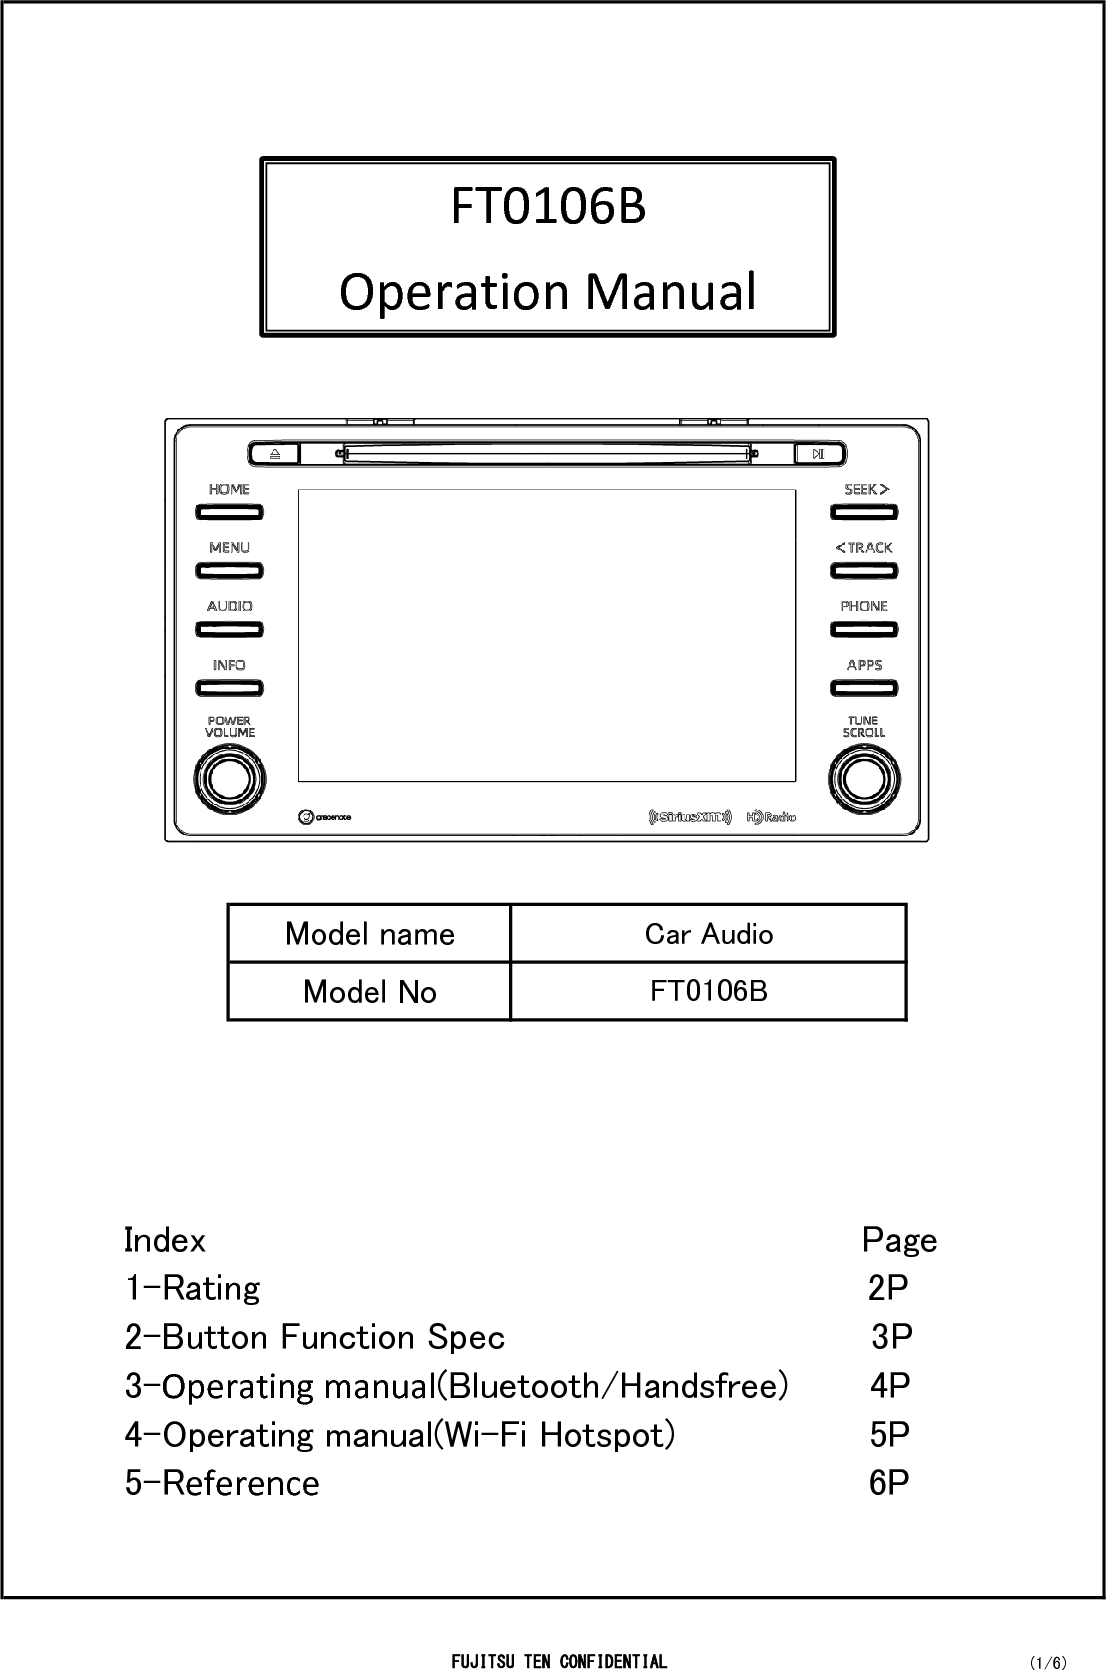 Model nameModel NoCar AudioFT0106BFT0106B  Operation Manual Index                                                     Page 1-Rating                                                 2P 2-Button Function Spec                                3P 3-Operating manual(Bluetooth/Handsfree)       4P 4-Operating manual(Wi-Fi Hotspot)                 5P 5-Reference                                                6P FUJITSU TEN CONFIDENTIAL (1/6)